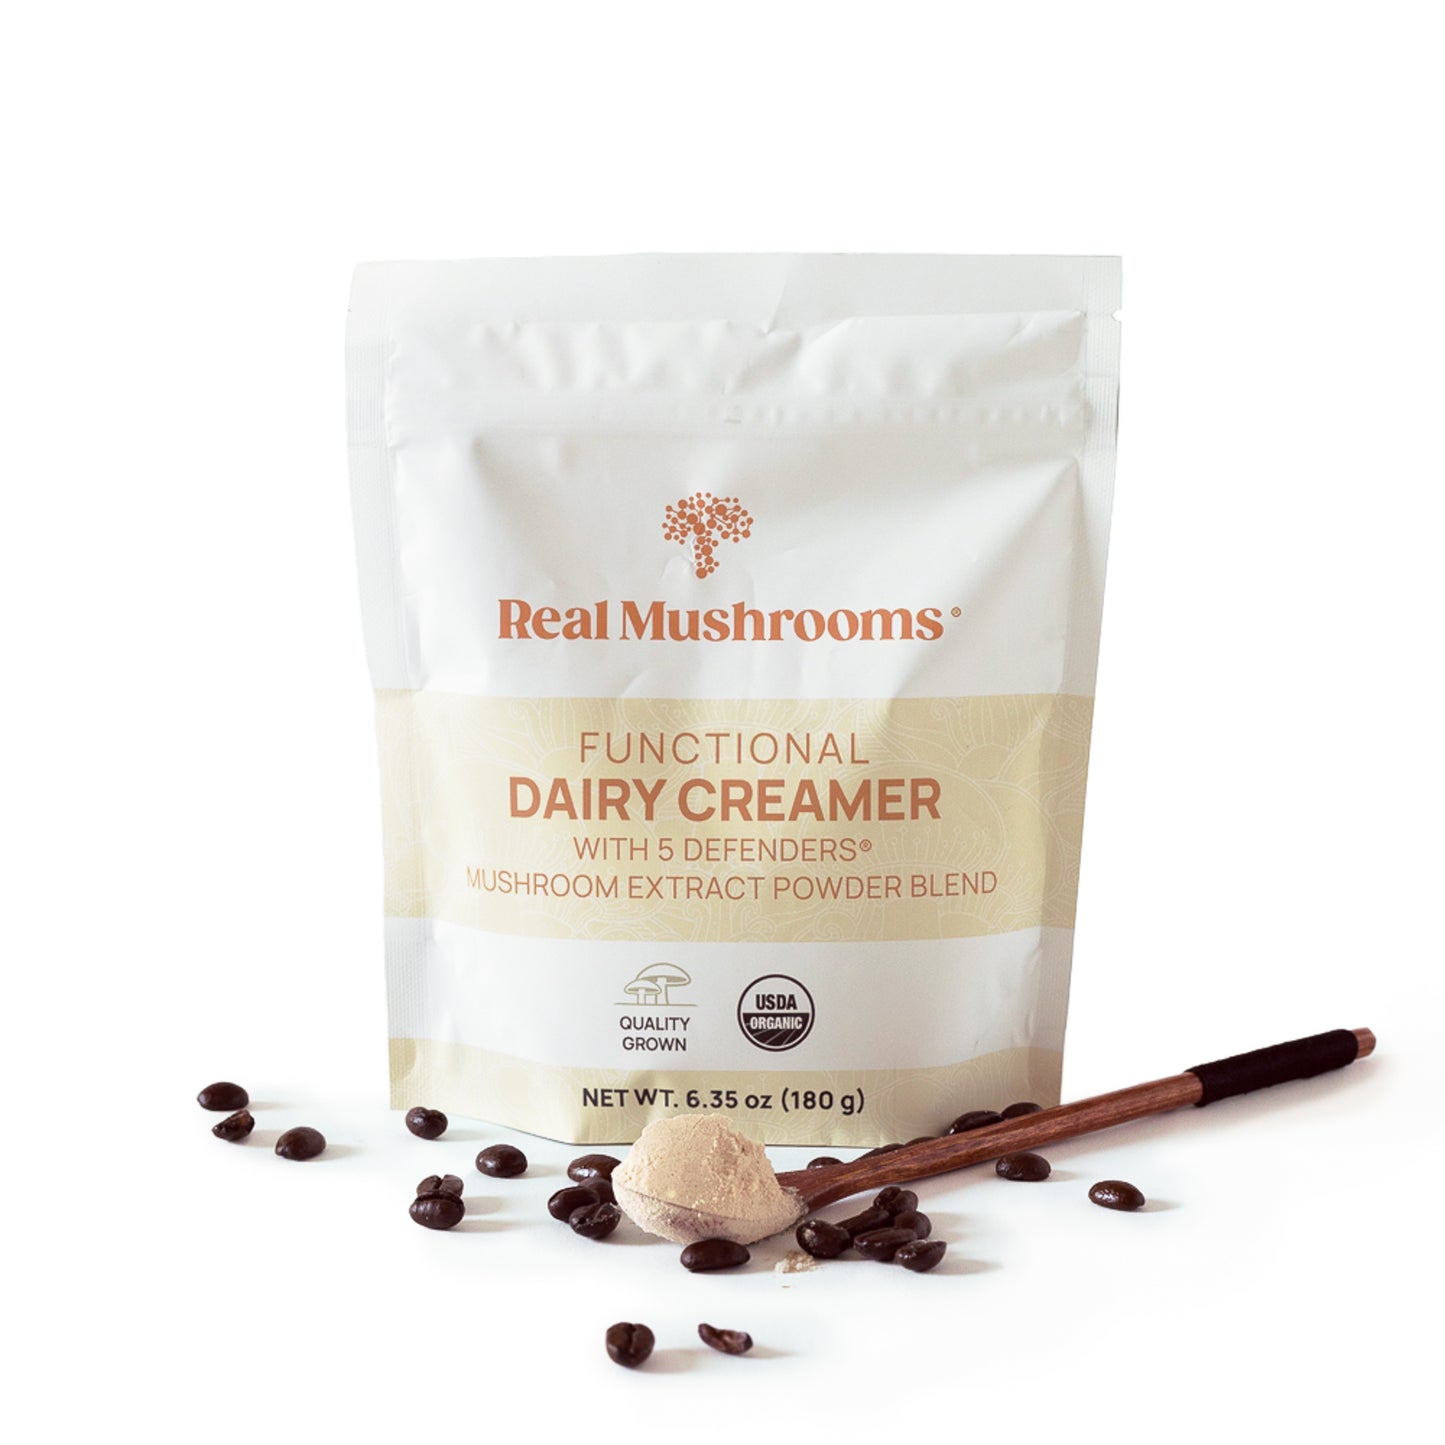 A bag of Real Mushrooms Functional Dairy Creamer Powder with a wooden spoon and coffee beans scattered around it on a white background.